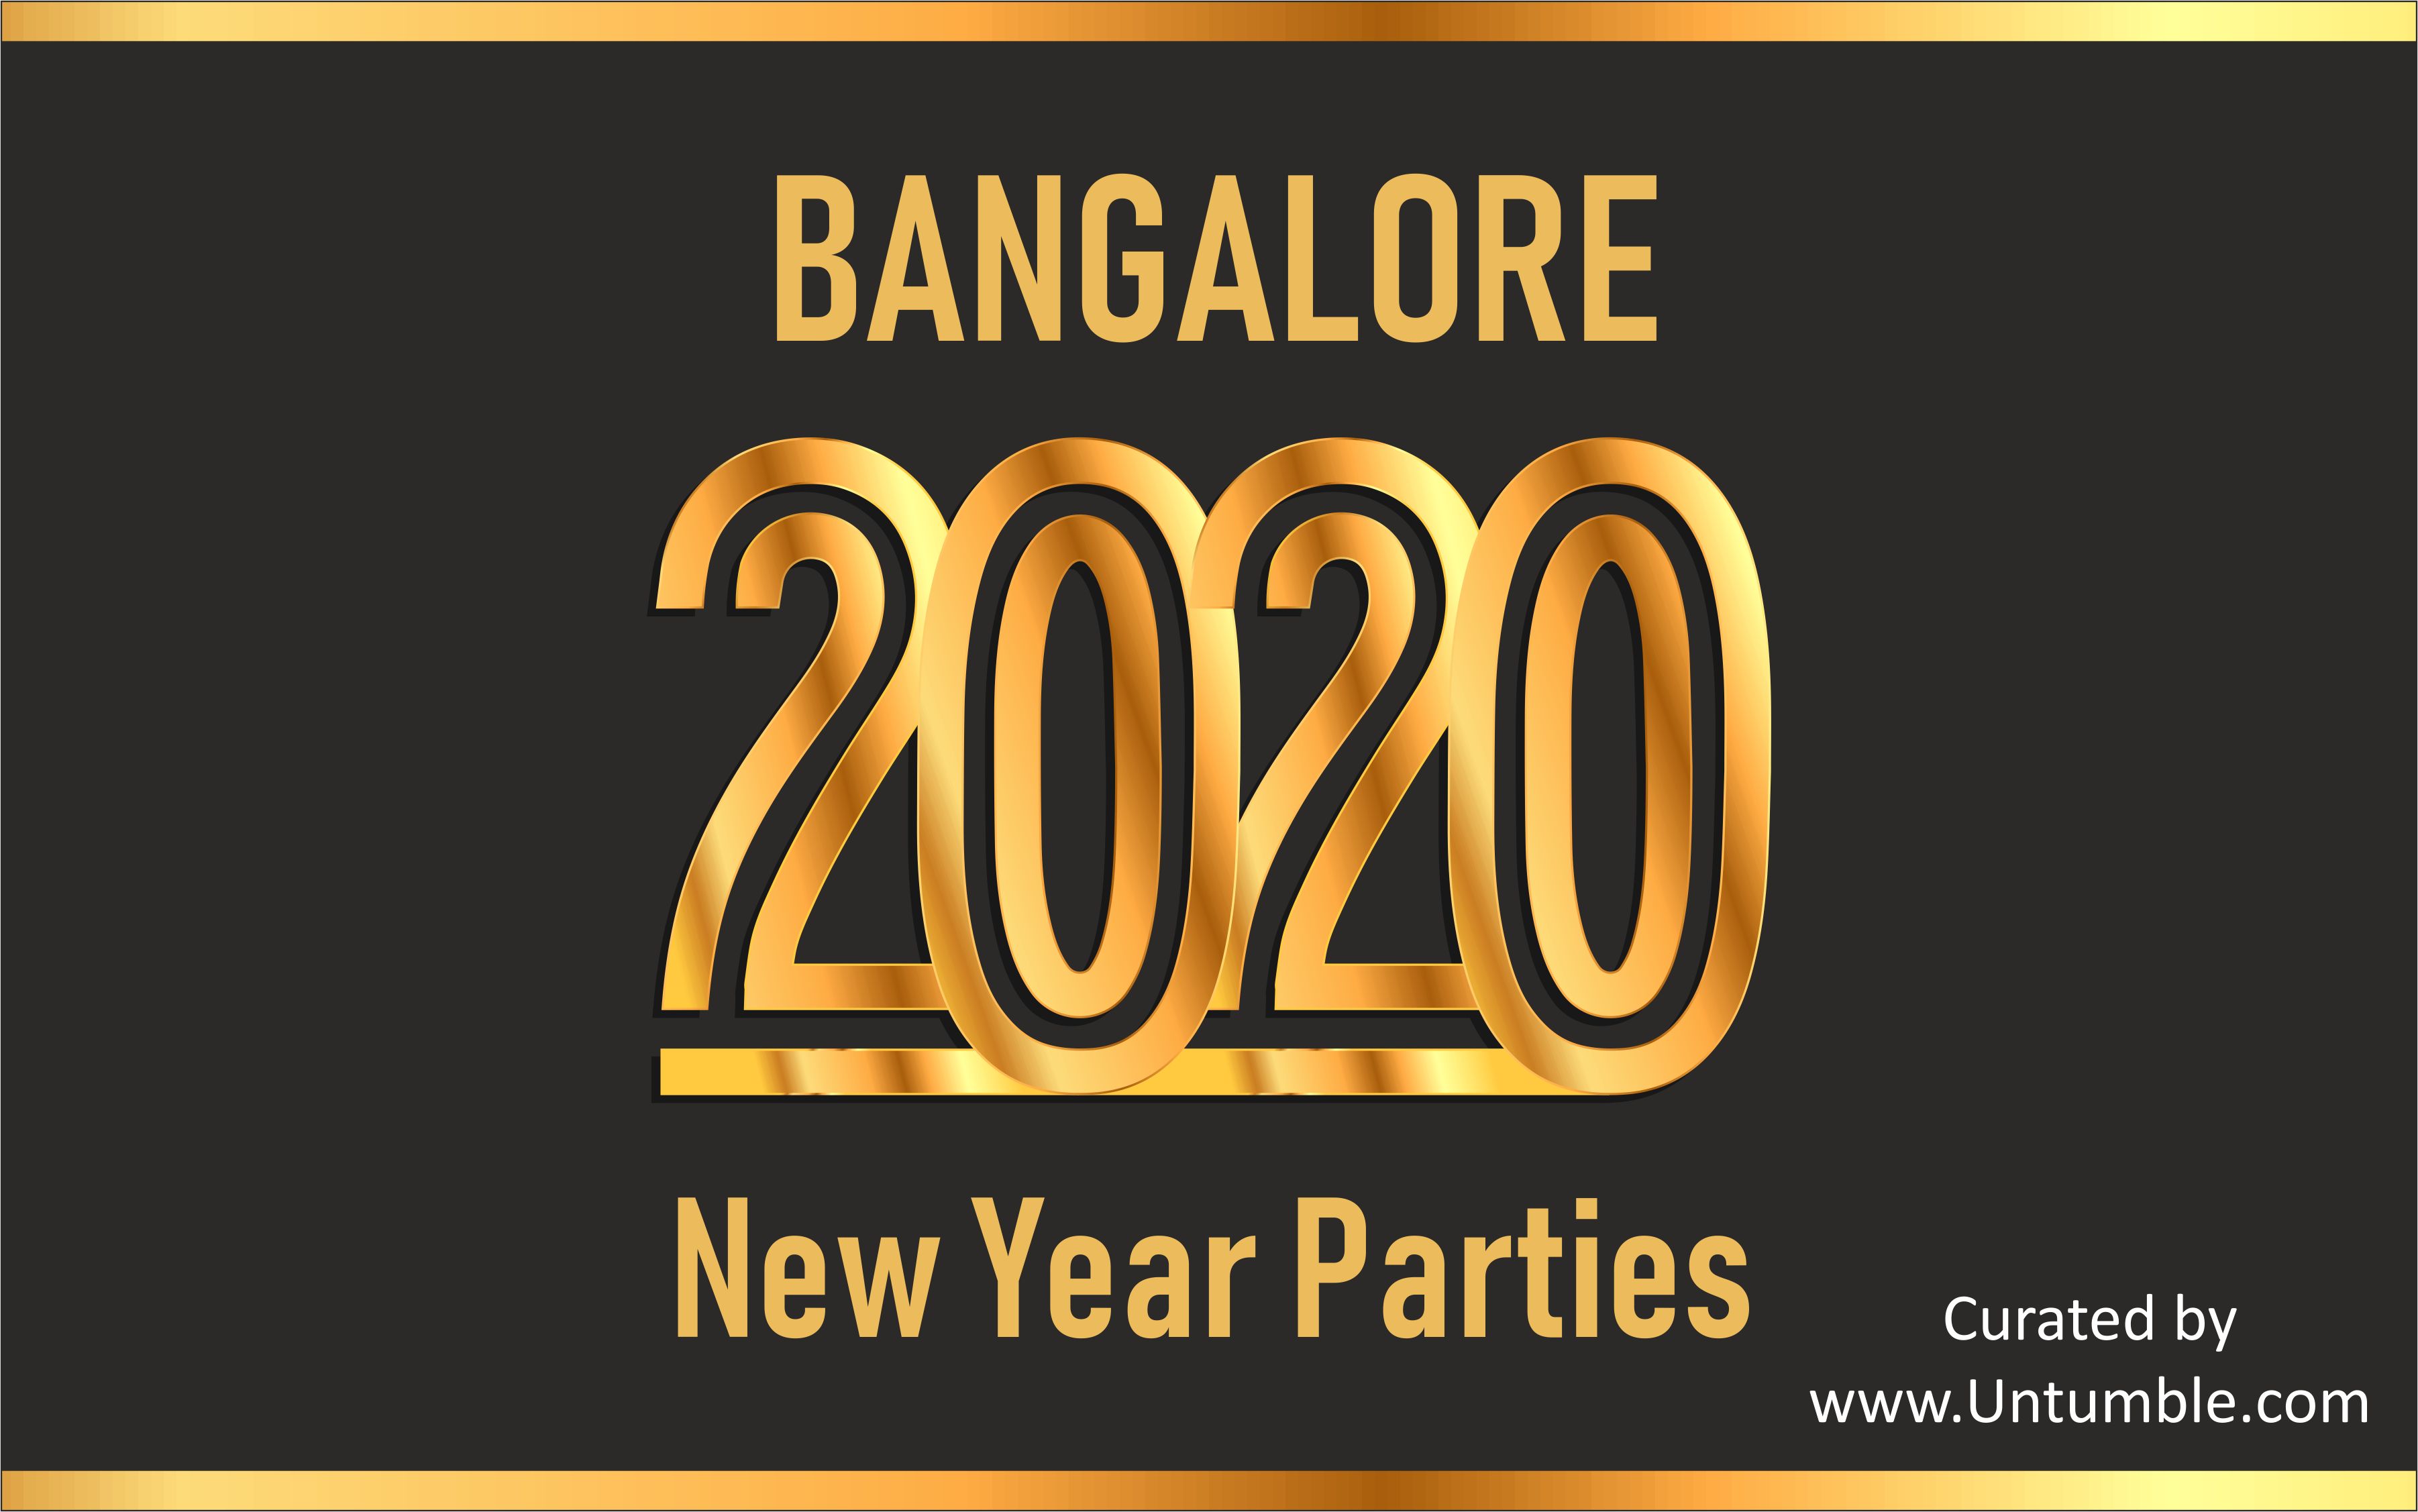 2020 New Year Parties in Bangalore